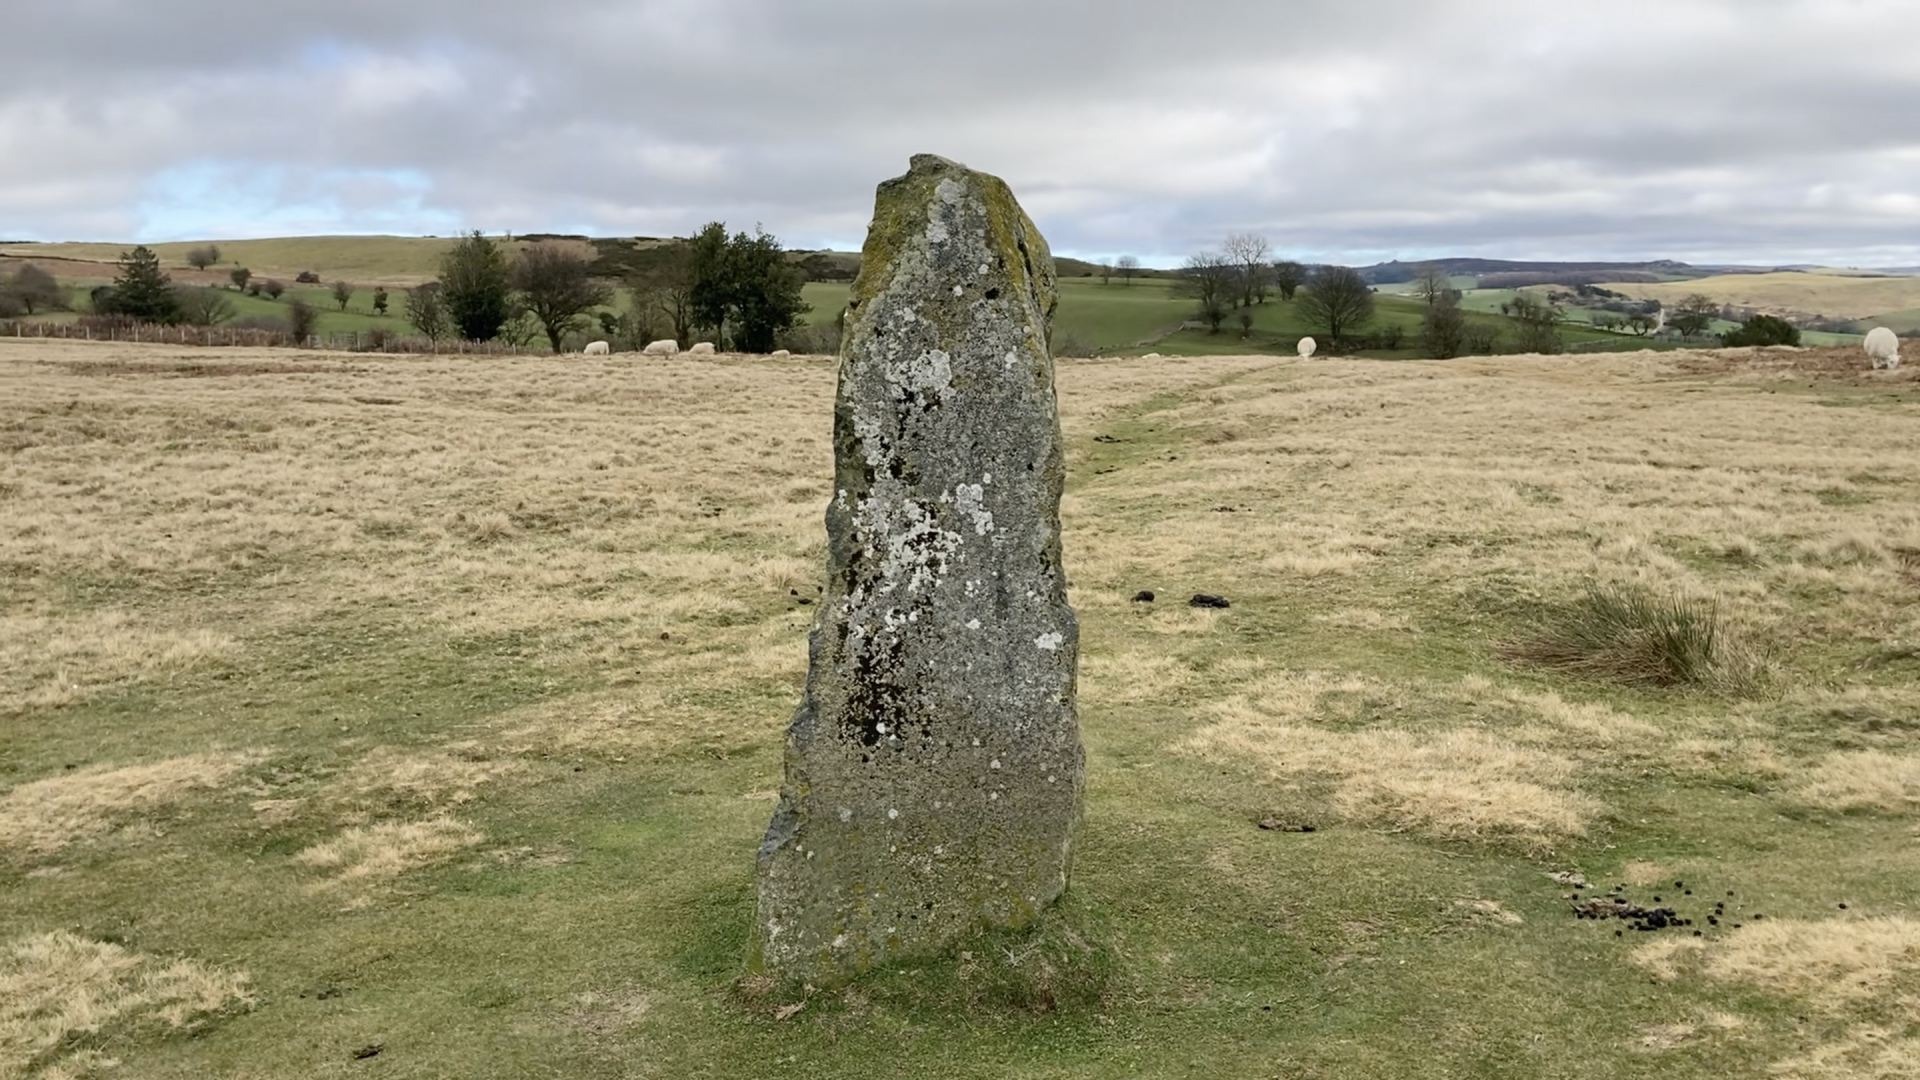 A still of a standing stone in a field.